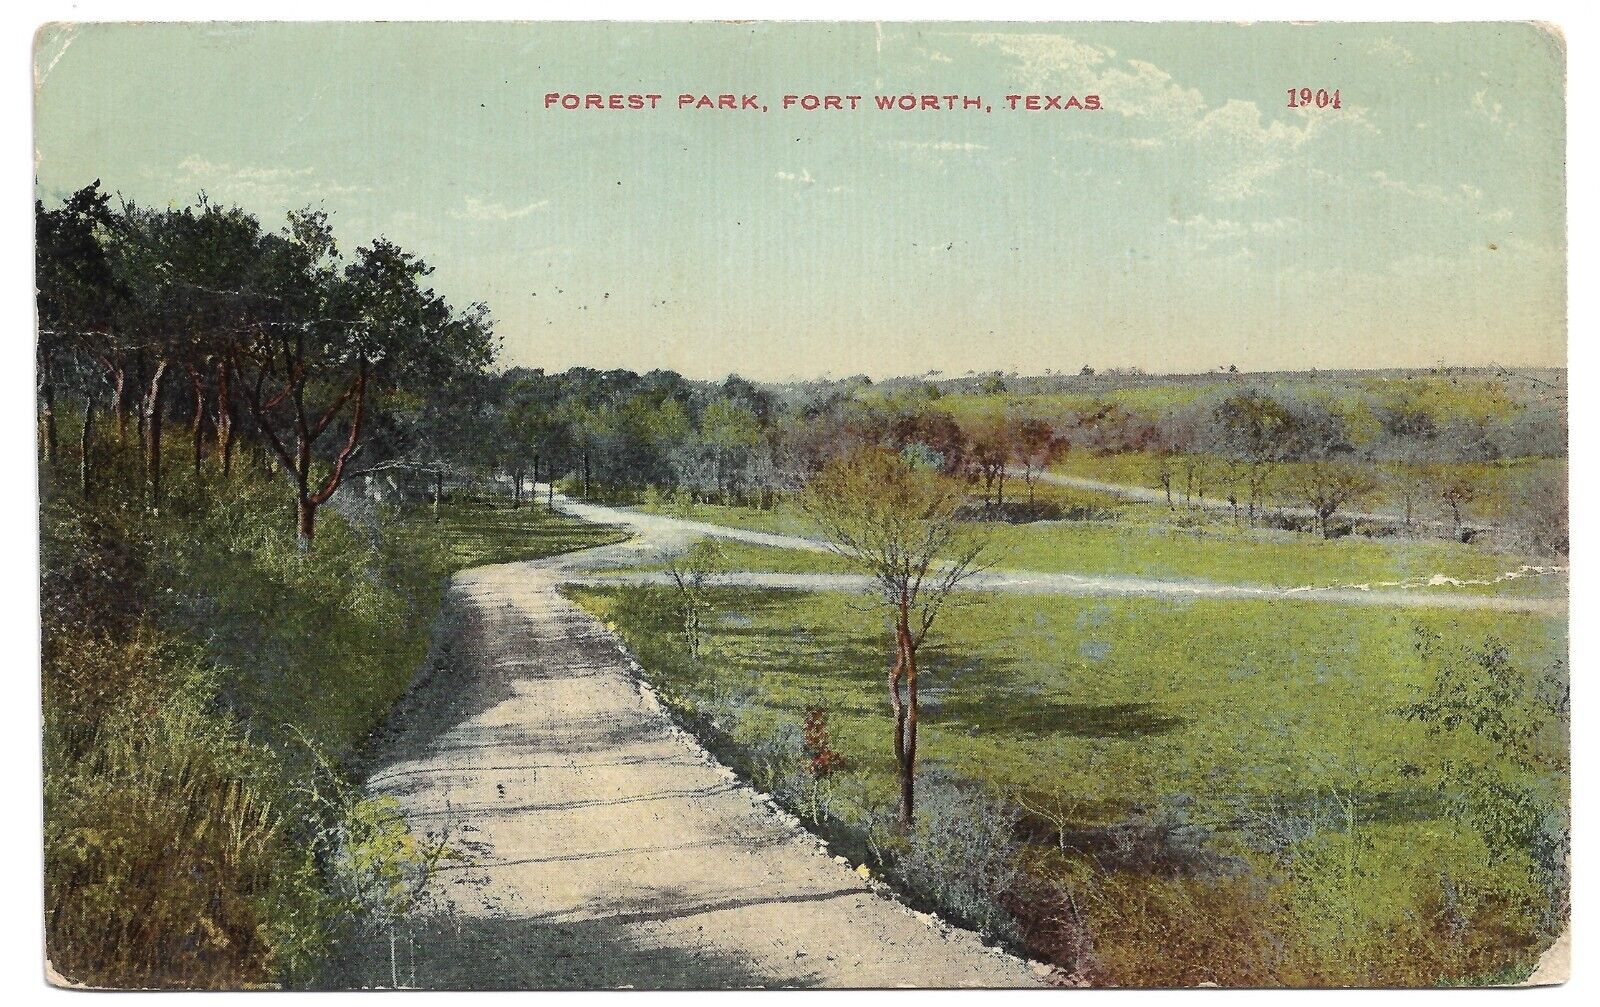 Fort Worth Texas TX Forest Park Street View 1912 Vintage Postcard